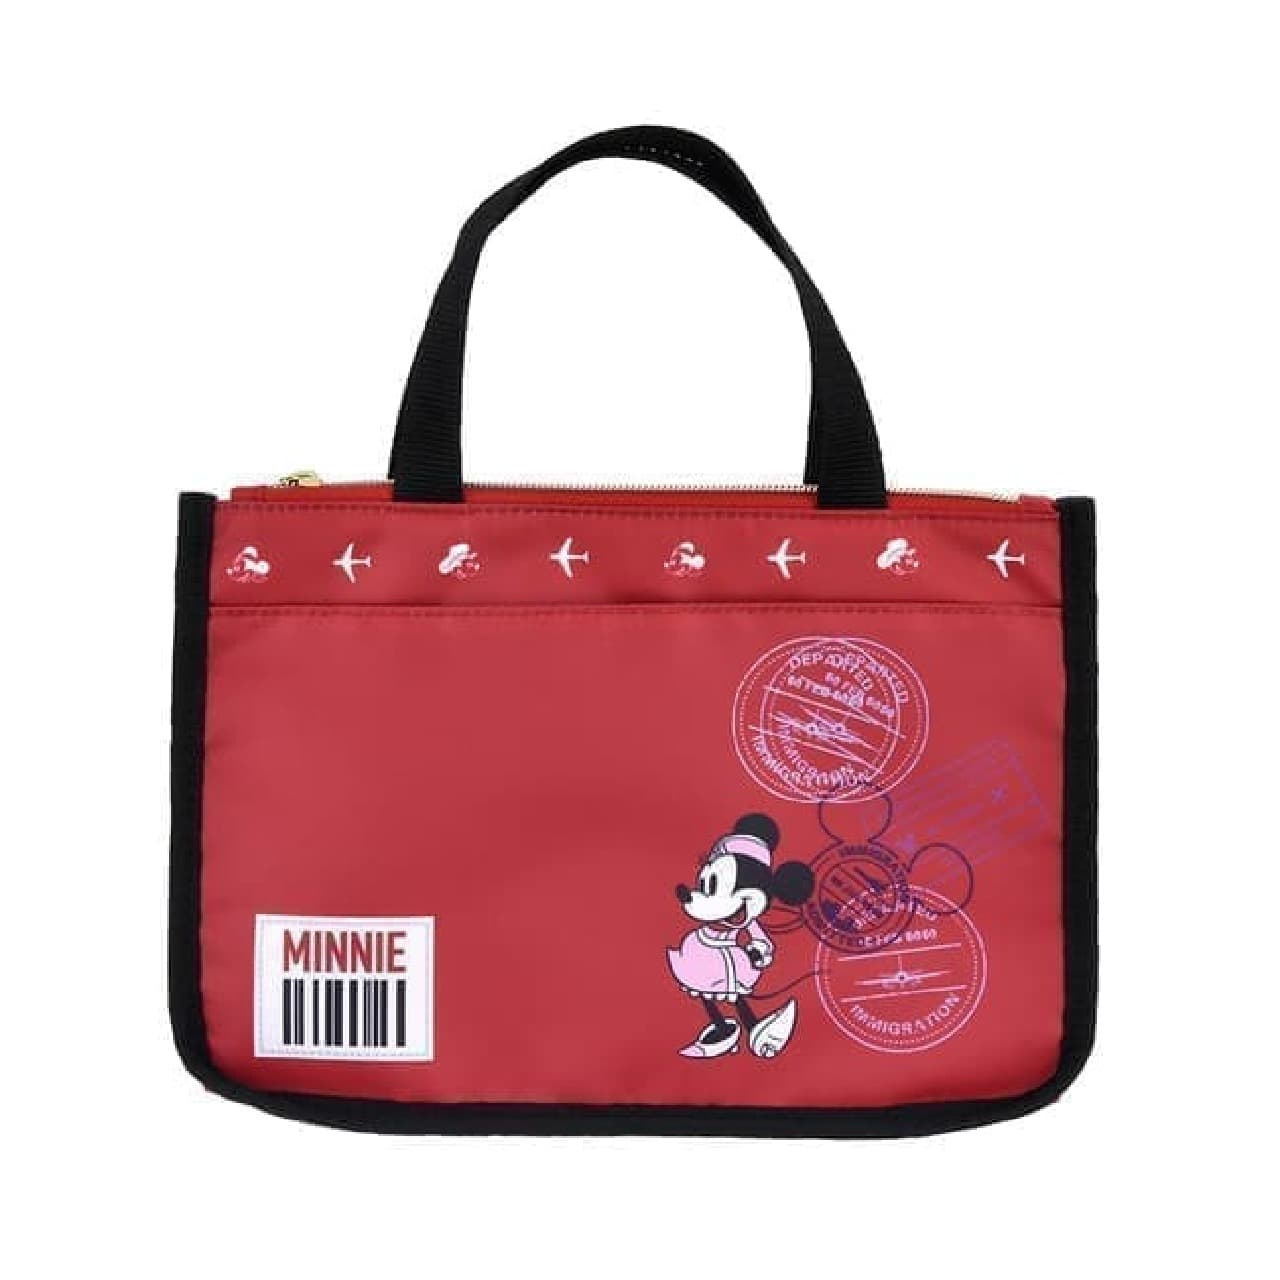 Mickey becomes a pilot! Travel goods from "Shop Disney"